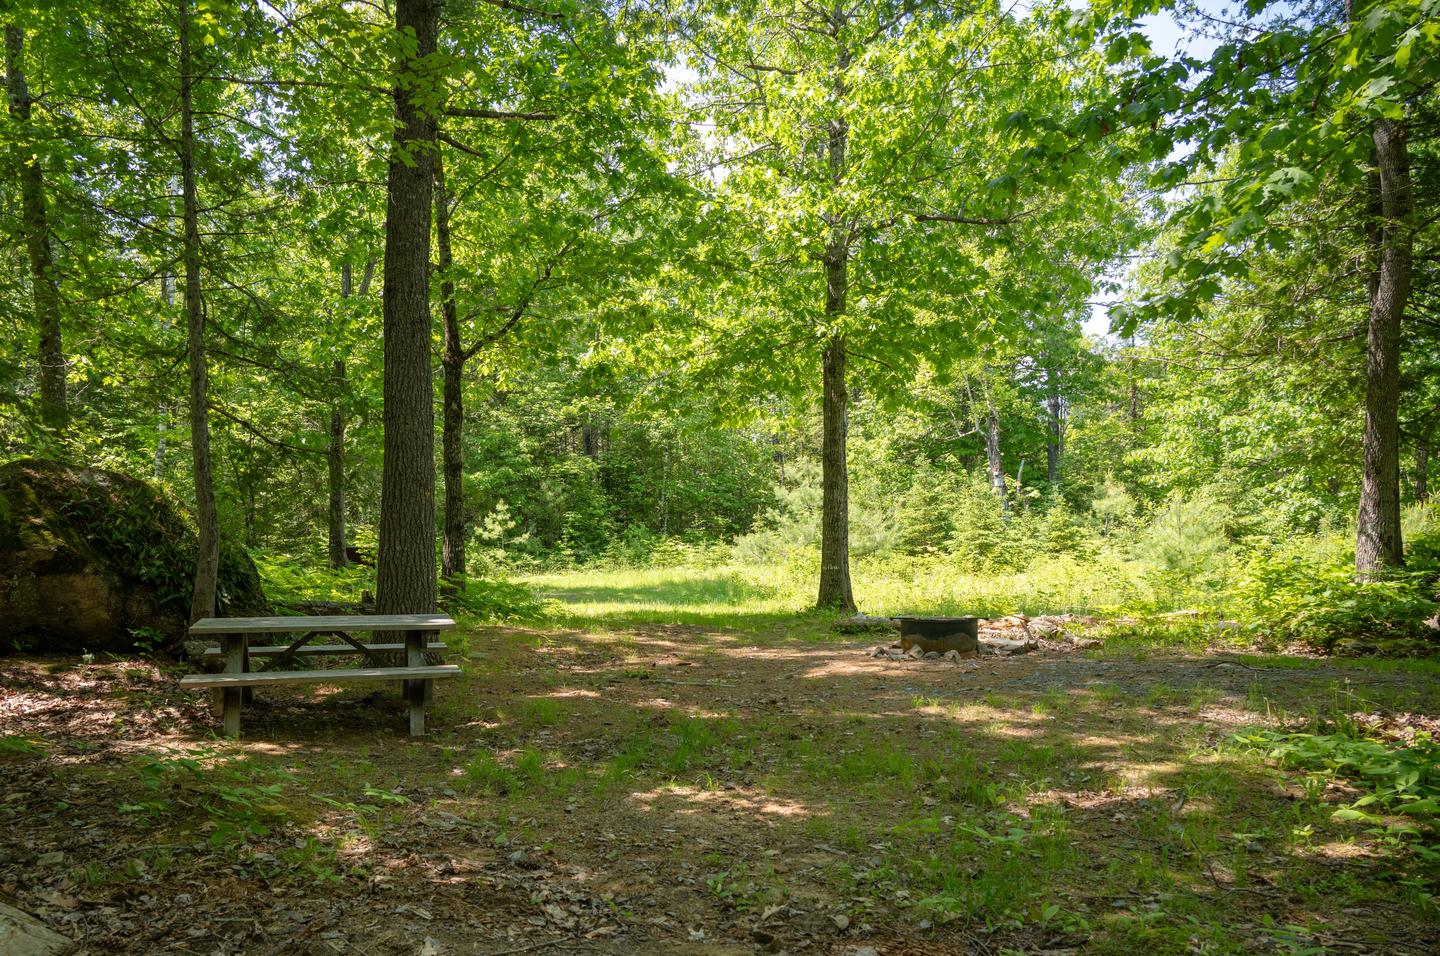 A large picnic area under the shade that has one picnic table and one campfire ring. A large boulder sits next to the picnic table.Haskell Deadwater has a large shaded campsite area with a picnic table and campfire ring.